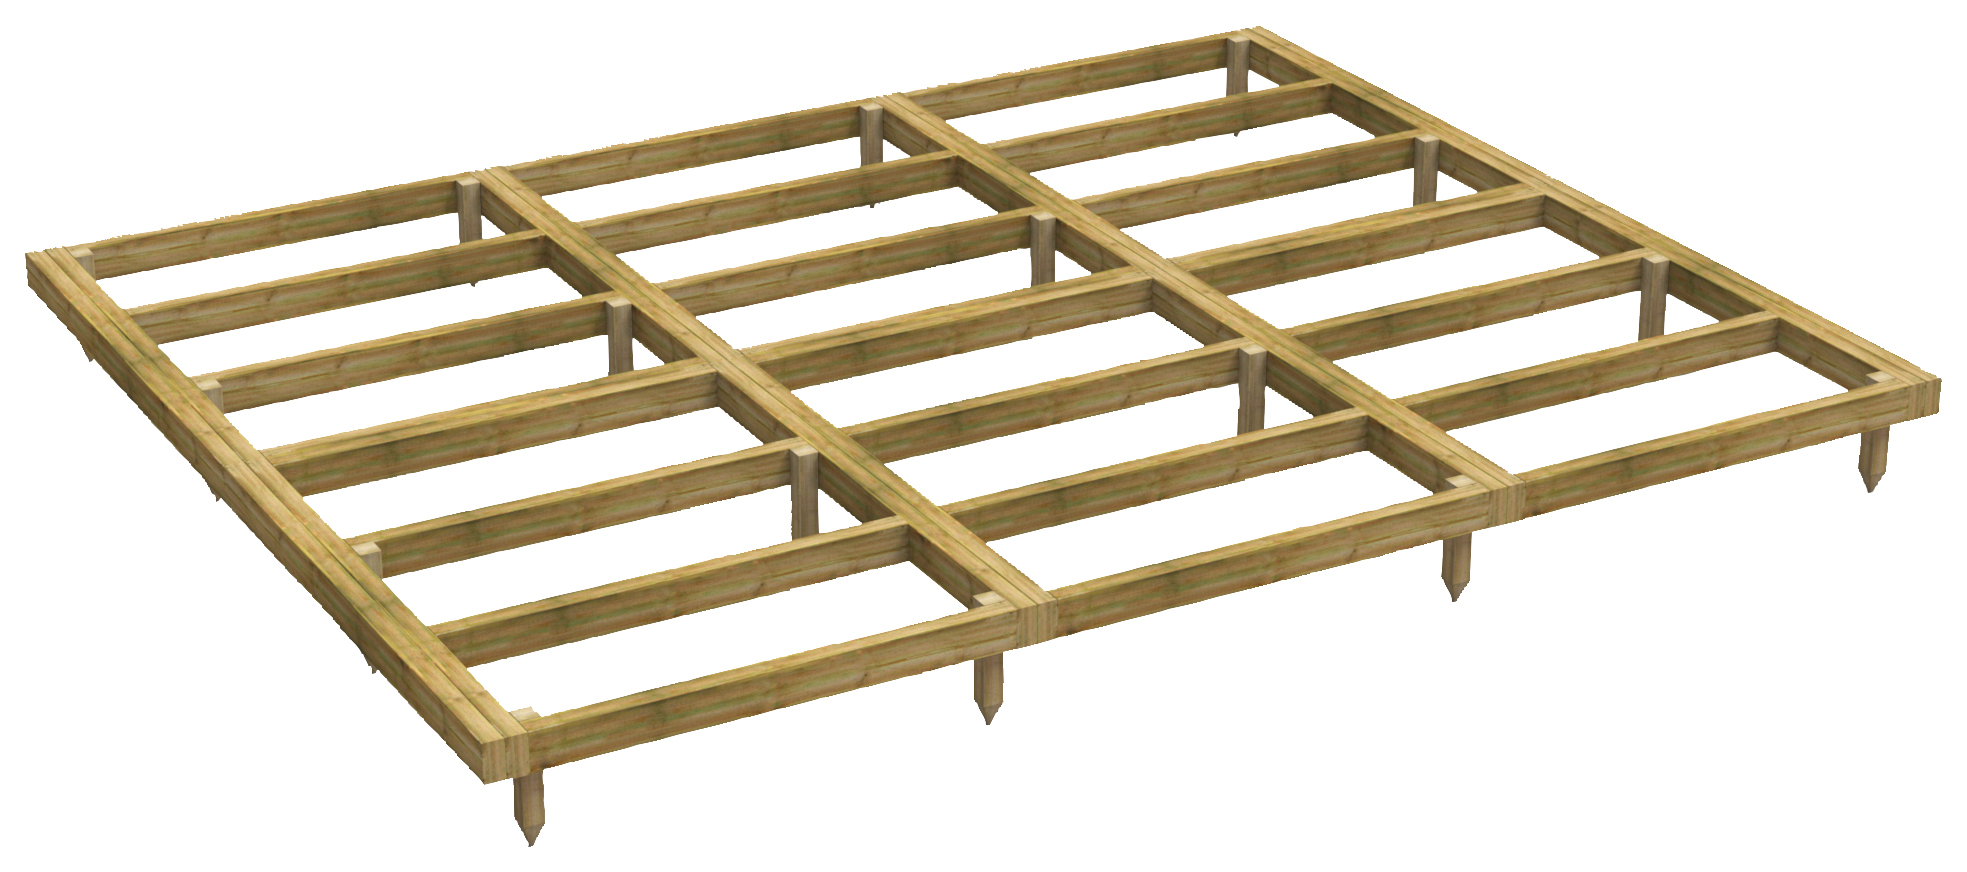 Power Sheds Pressure Treated Garden Building Base Kit - 12 x 10ft